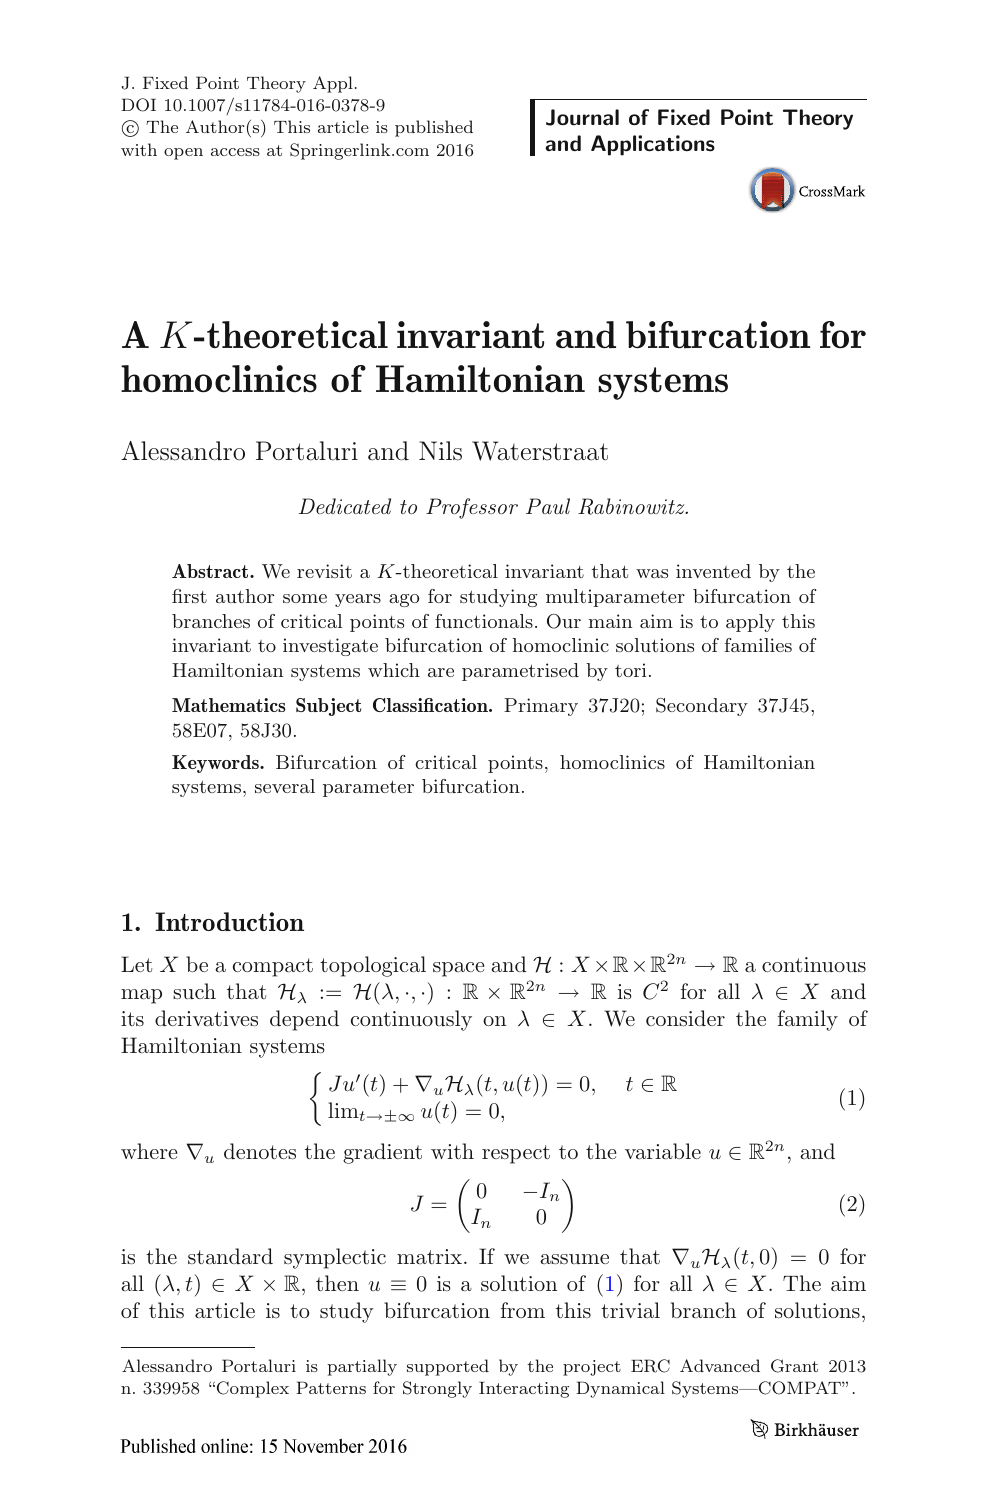 A K Theoretical Invariant And Bifurcation For Homoclinics Of Hamiltonian Systems Topic Of Research Paper In Mathematics Download Scholarly Article Pdf And Read For Free On Cyberleninka Open Science Hub